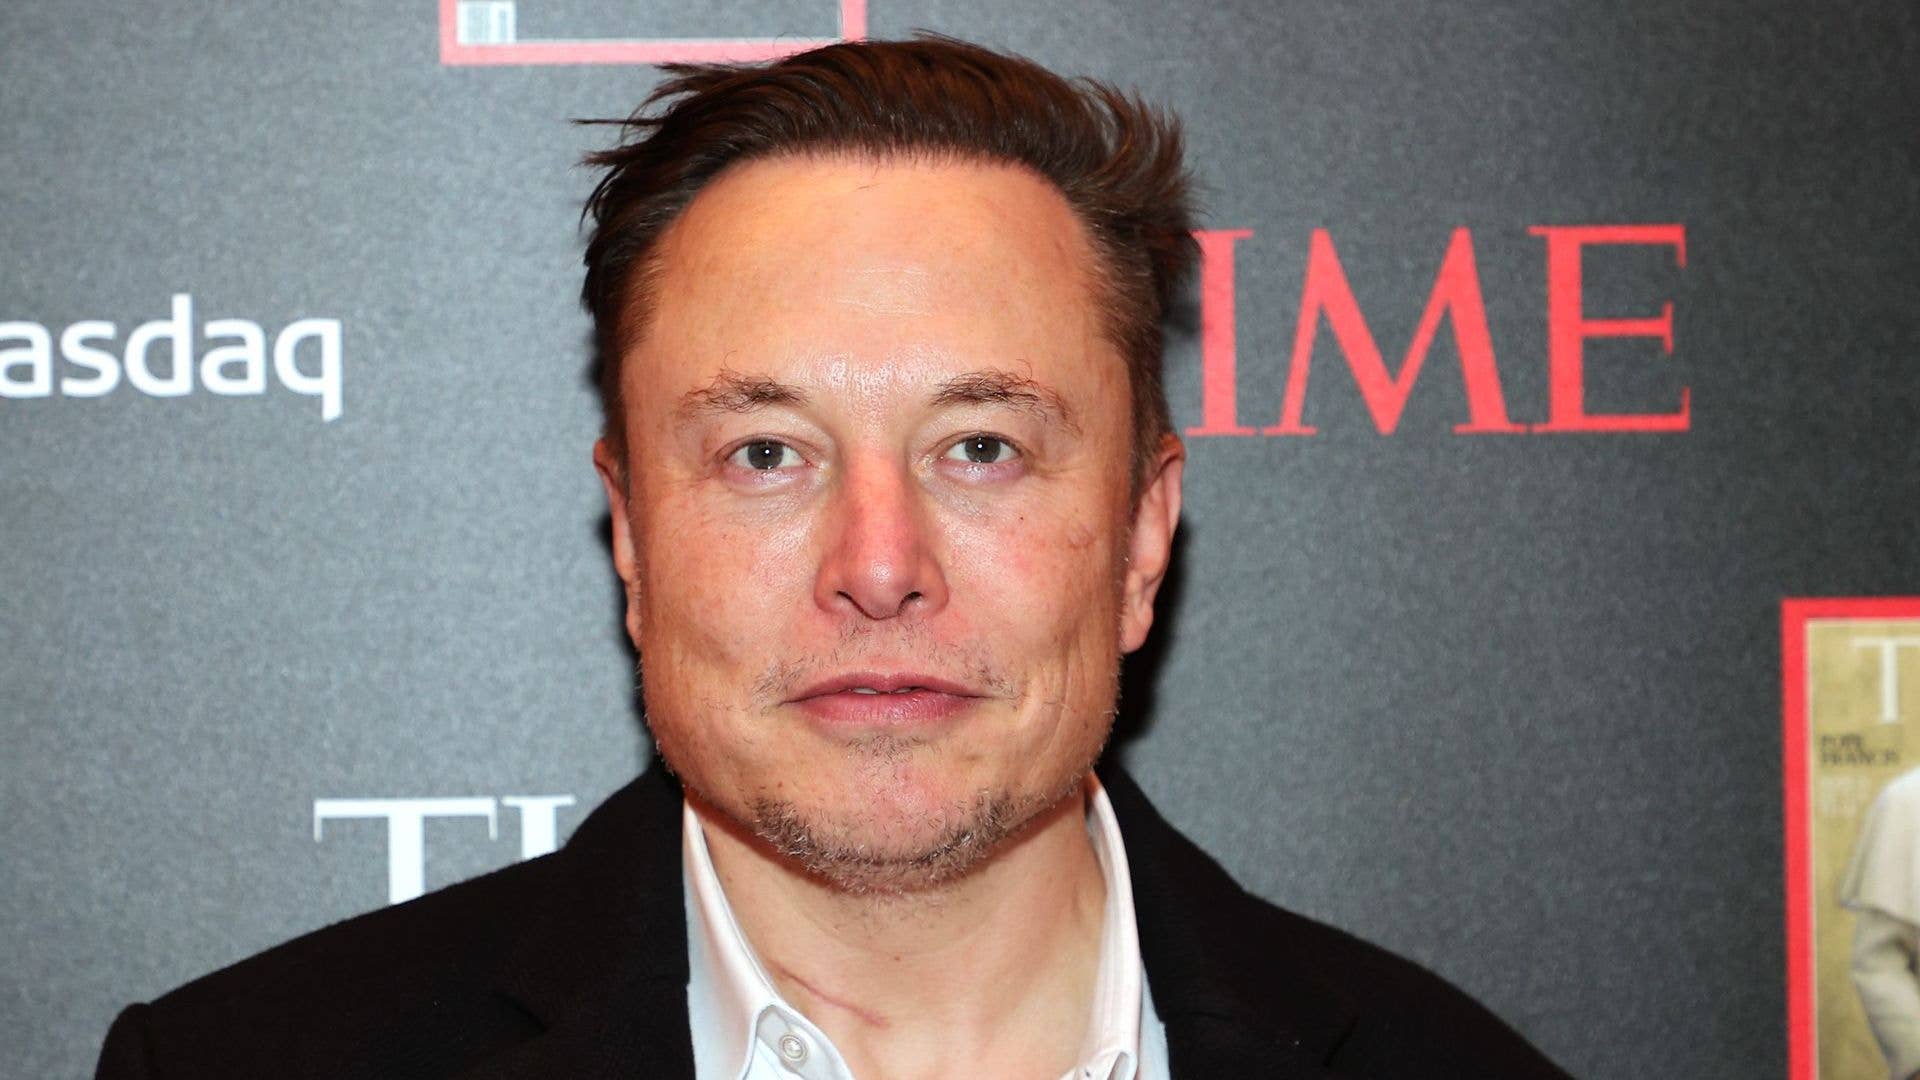 Elon Musk at the times red carpet.